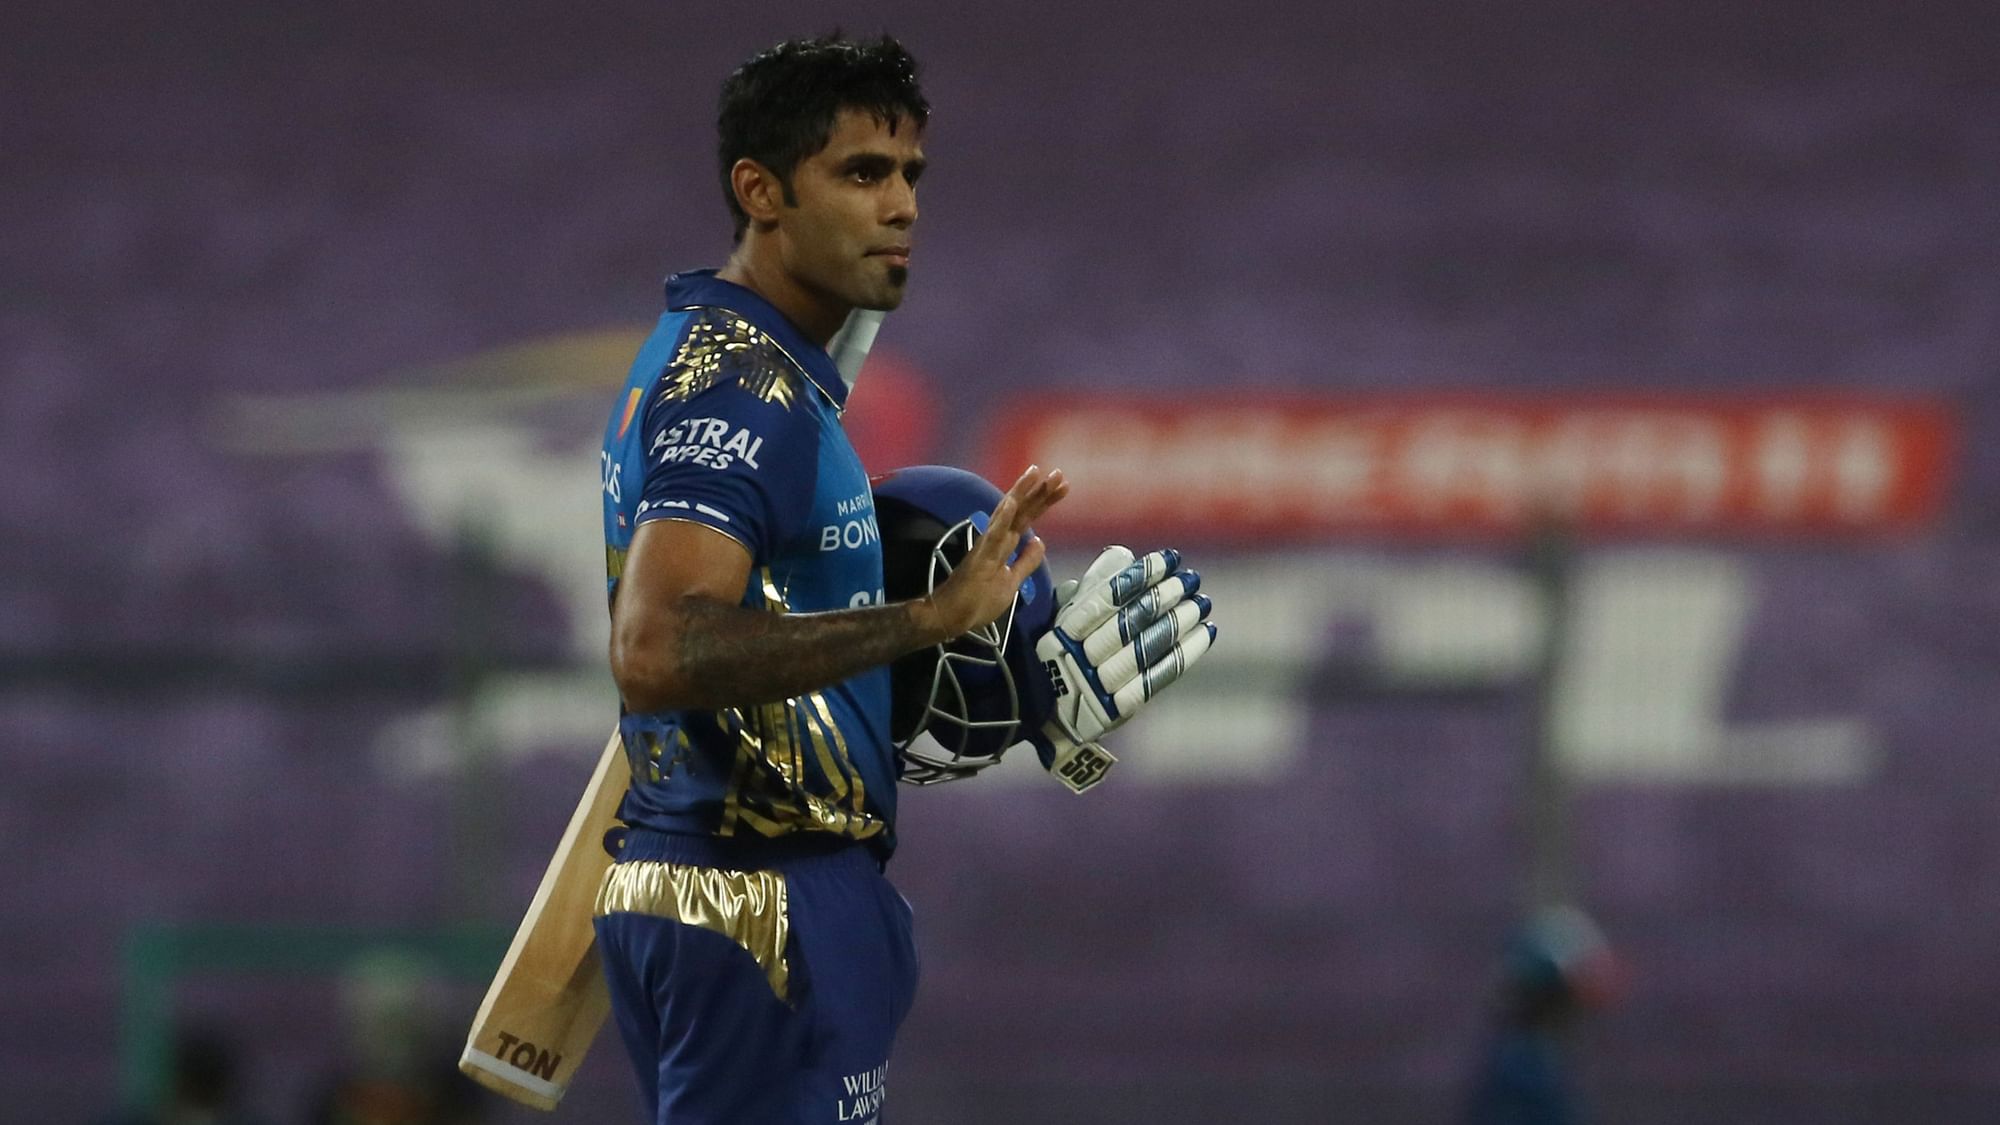 Suryakumar Yadav has been in terrific form for Mumbai Indians in this IPL as he amassed 480 runs.